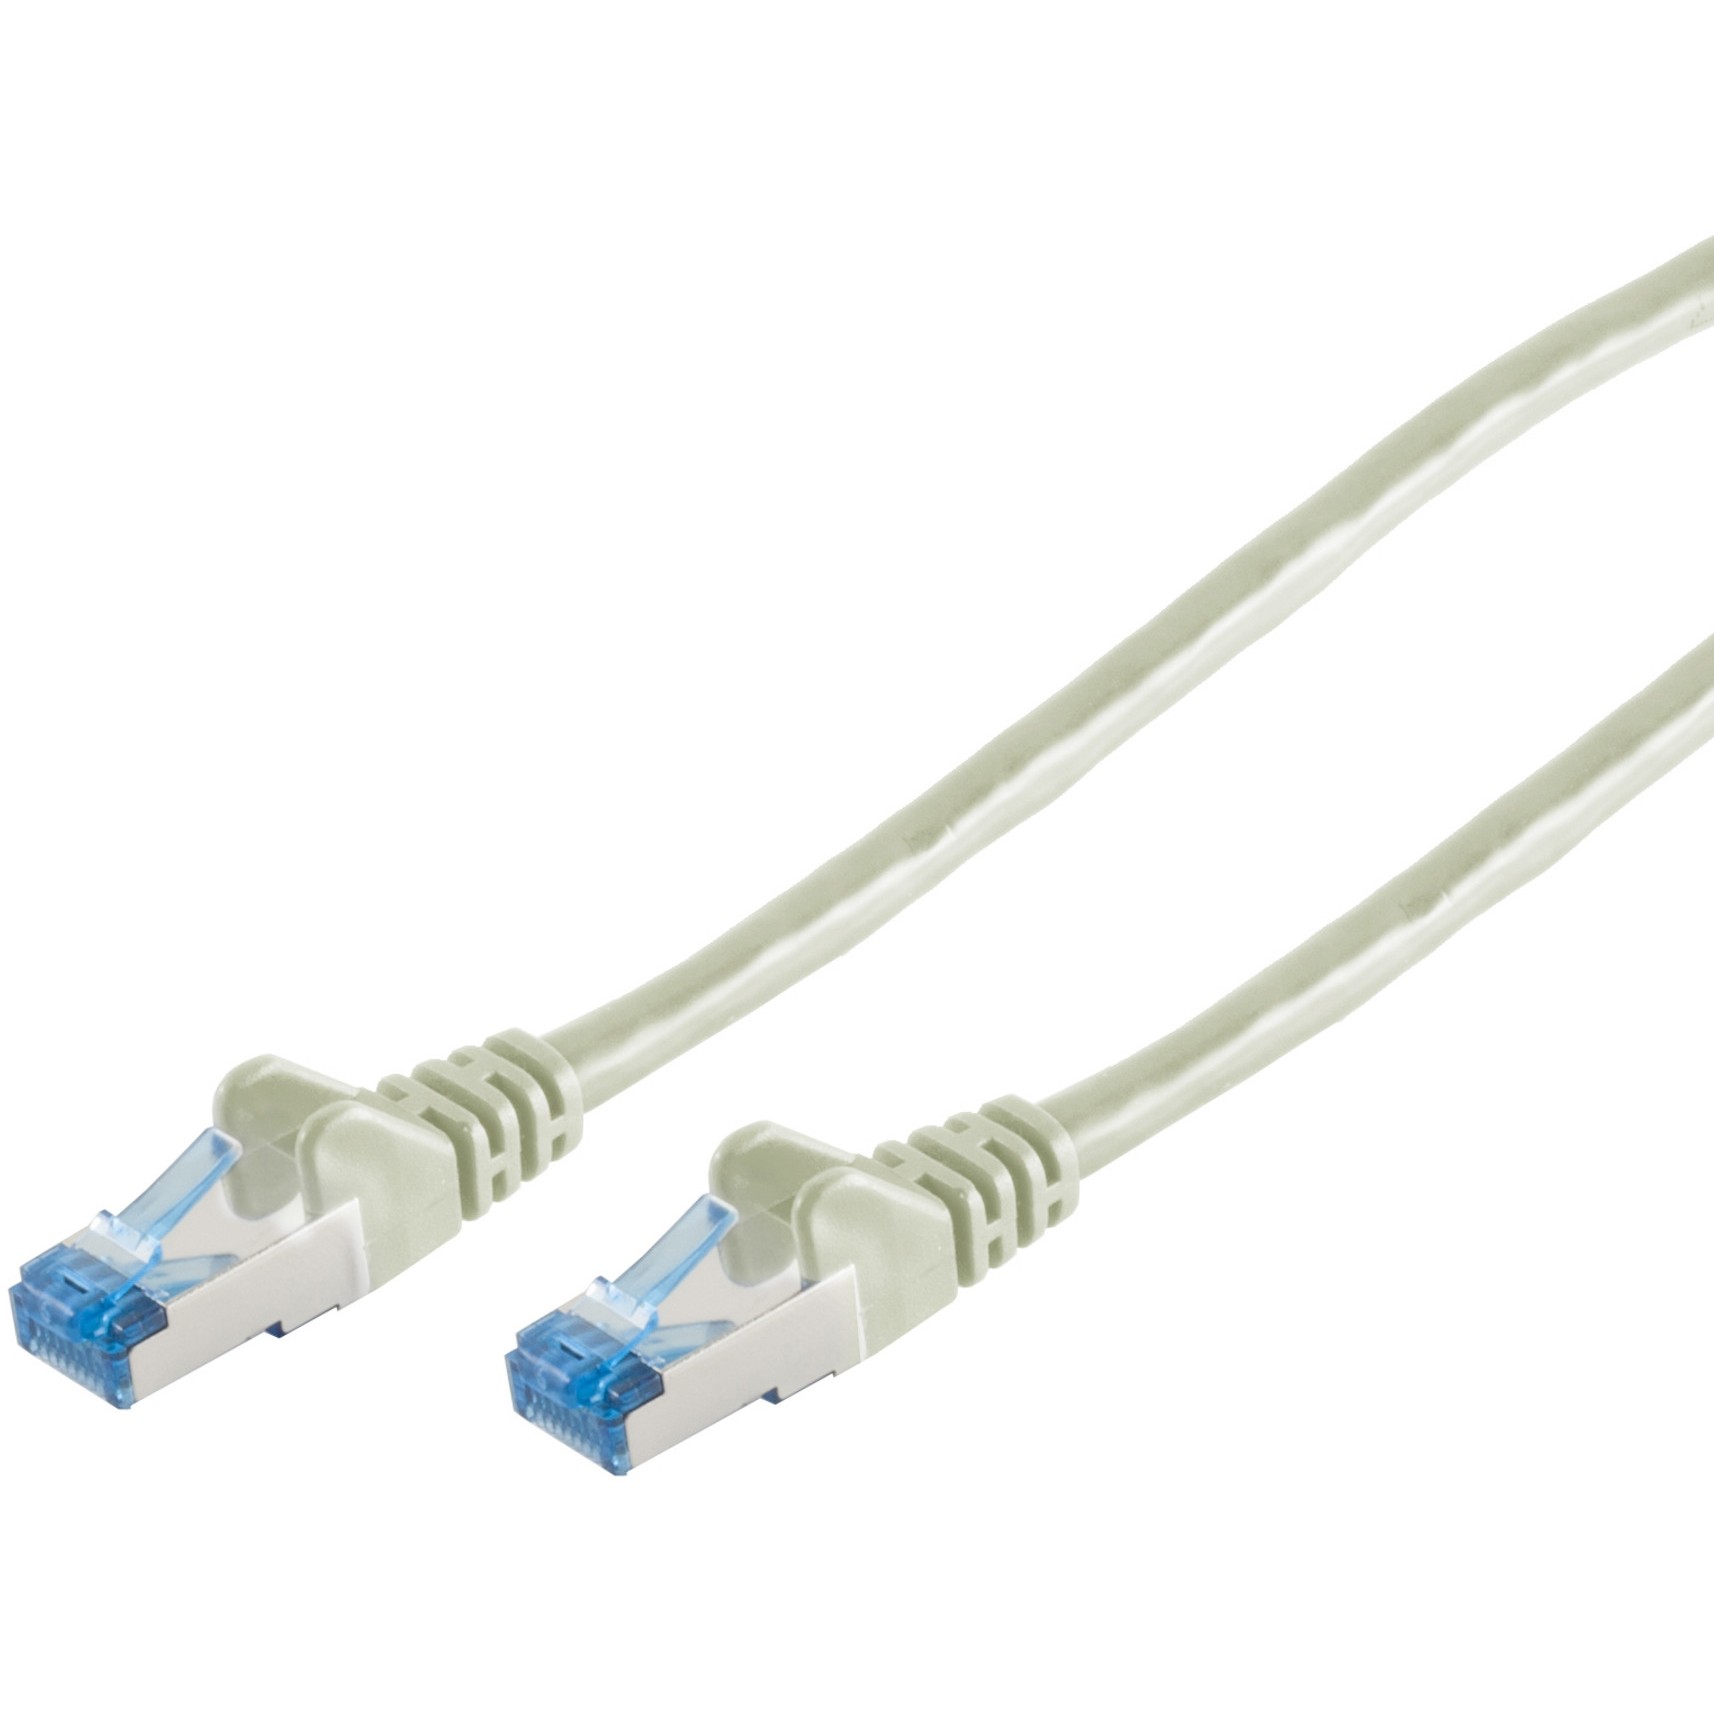 S-Conn 75717 networking cable